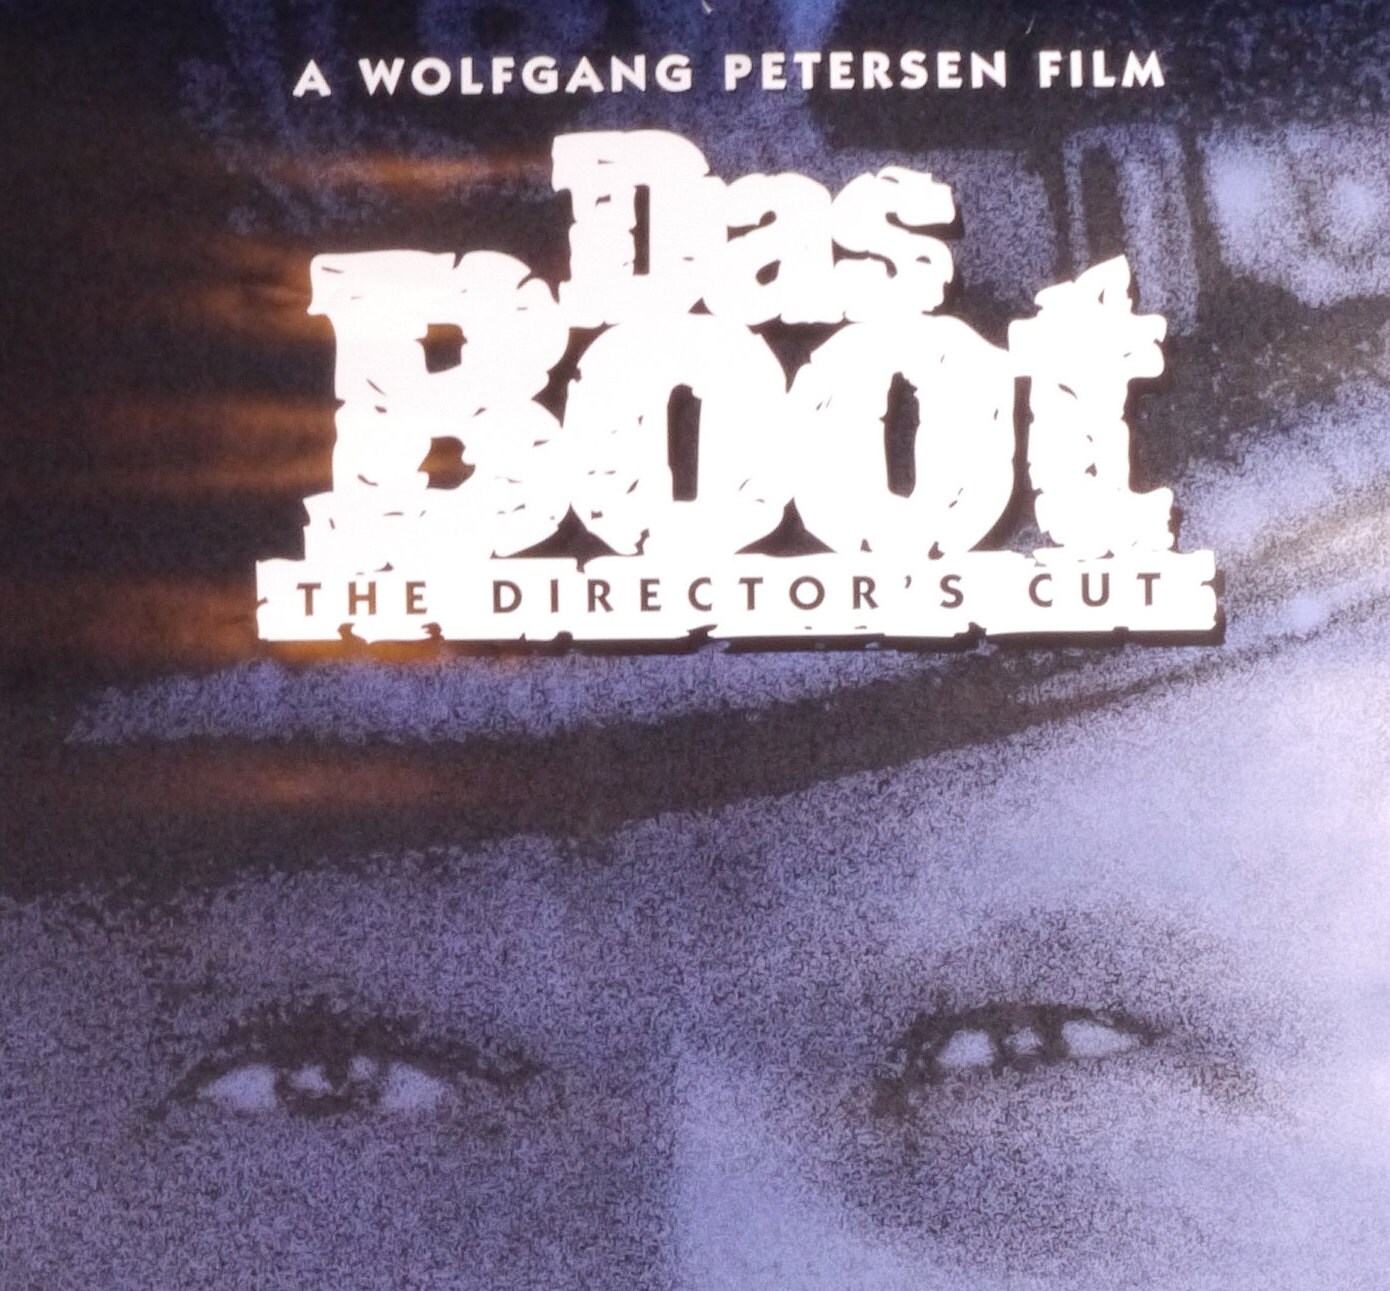 Das Boot-Original Poster for Wolfgang Petersen's Story of | Etsy